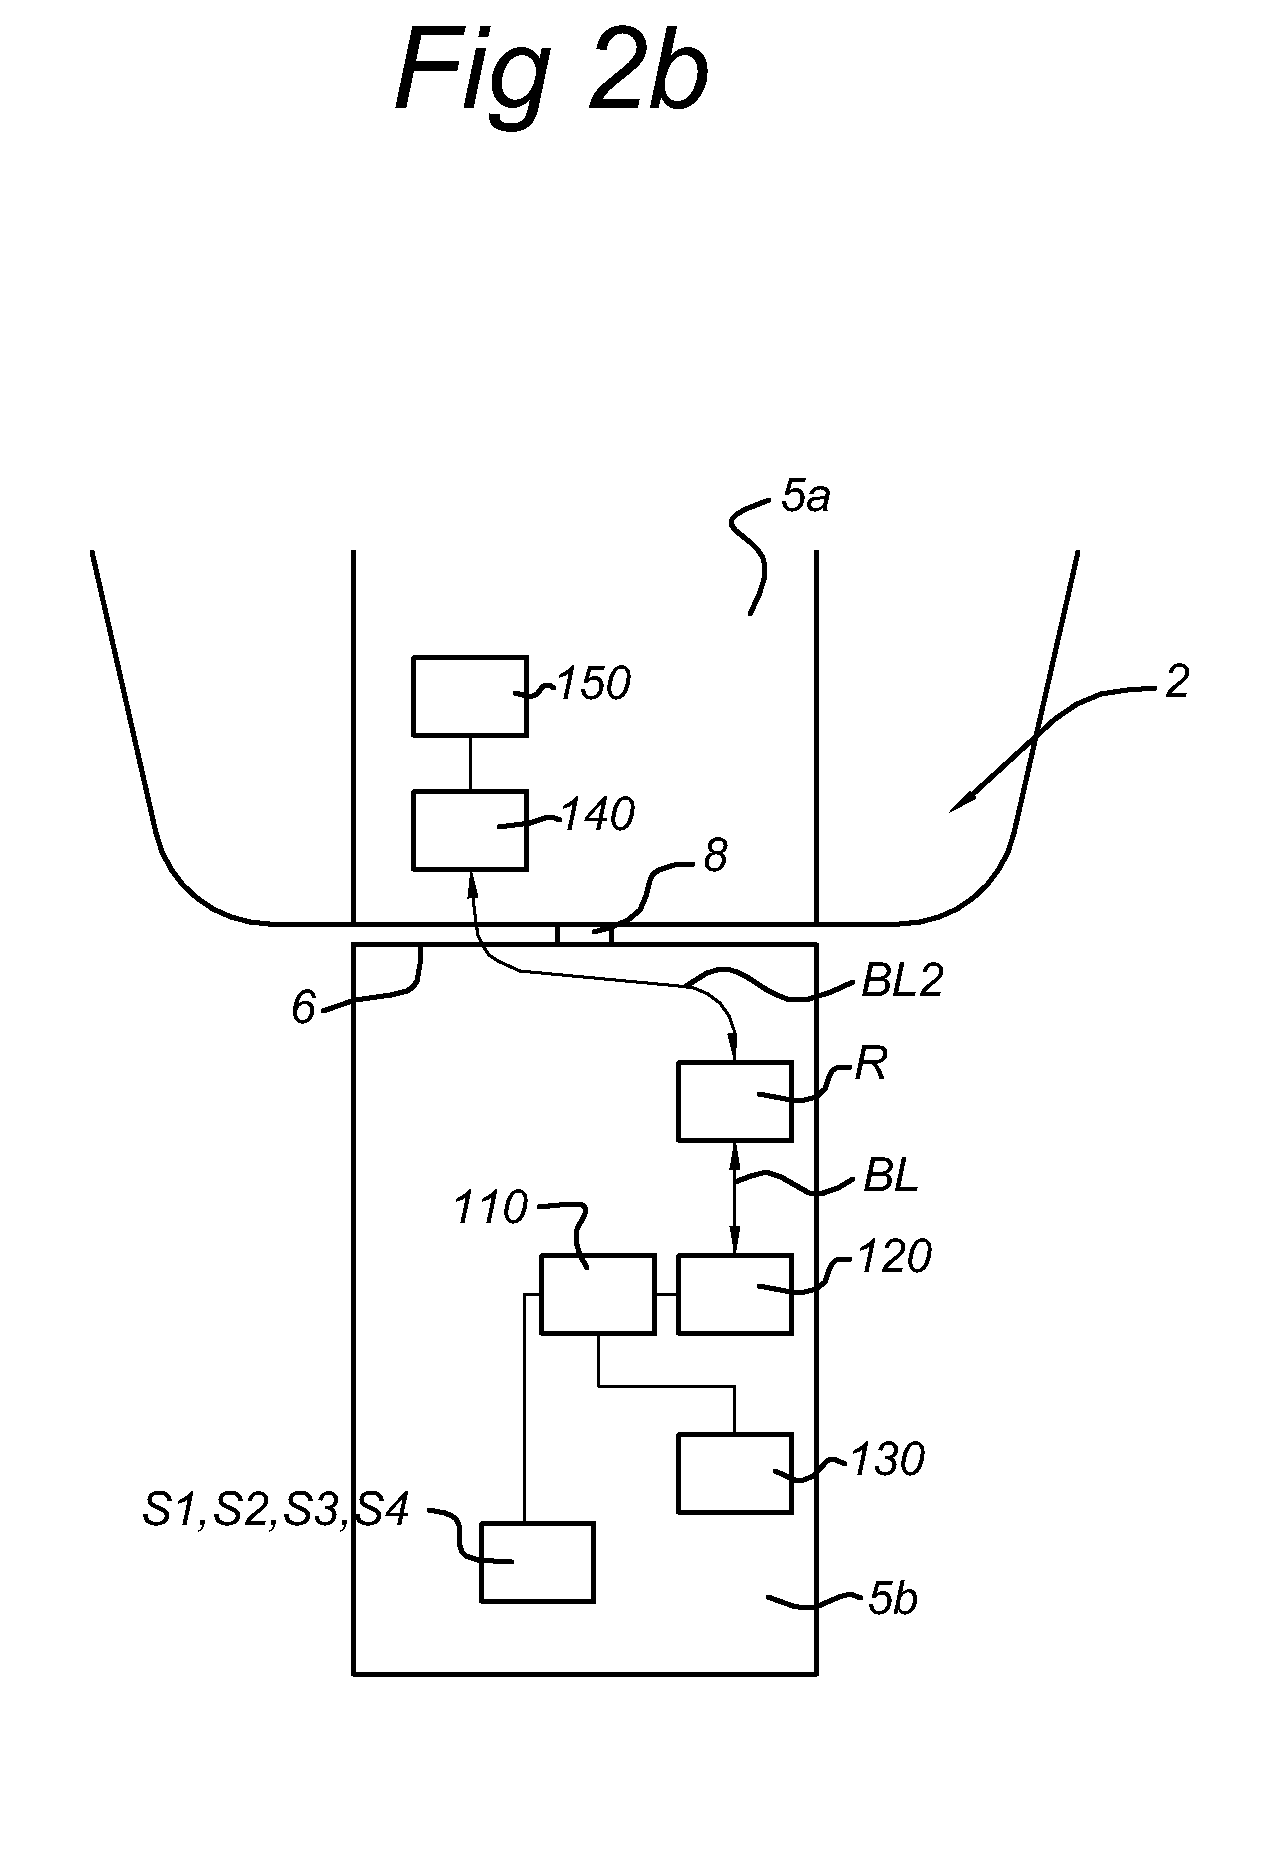 Telemetry system for ship propulsion systems